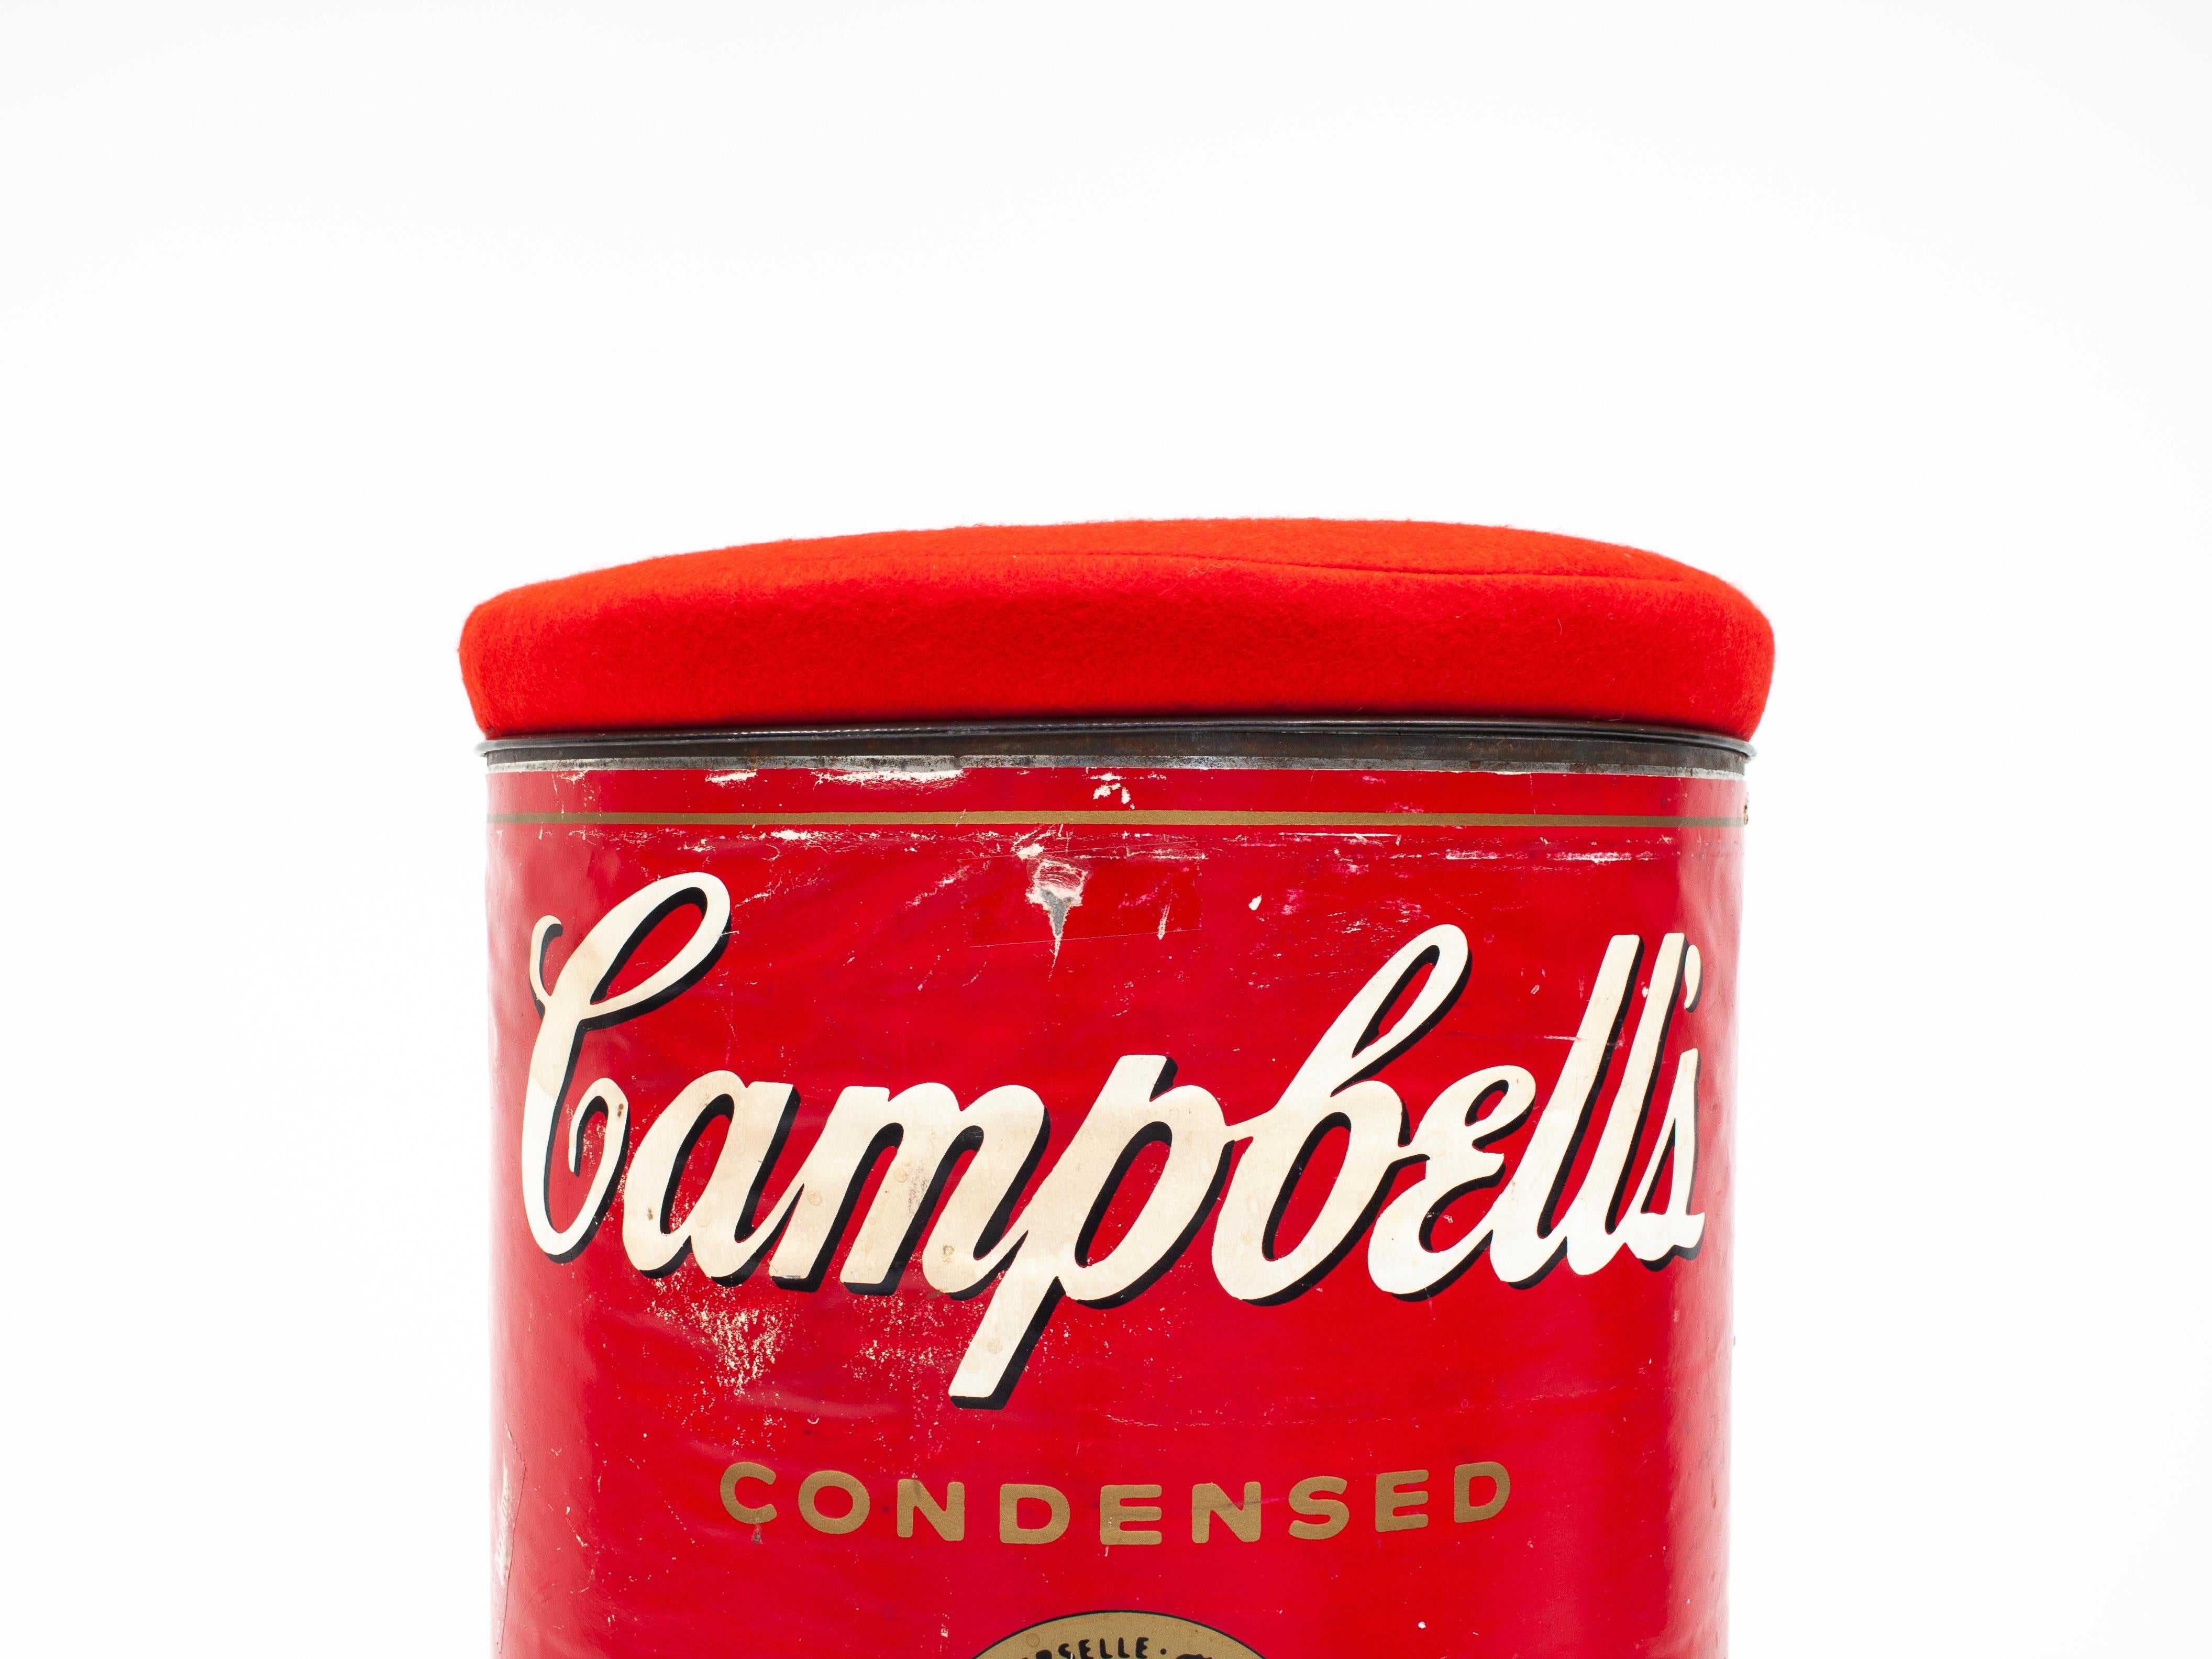 Think Big! NYC, Oversized Campbells Soup Can Stool, Dated 1986 In Good Condition In London Road, Baldock, Hertfordshire